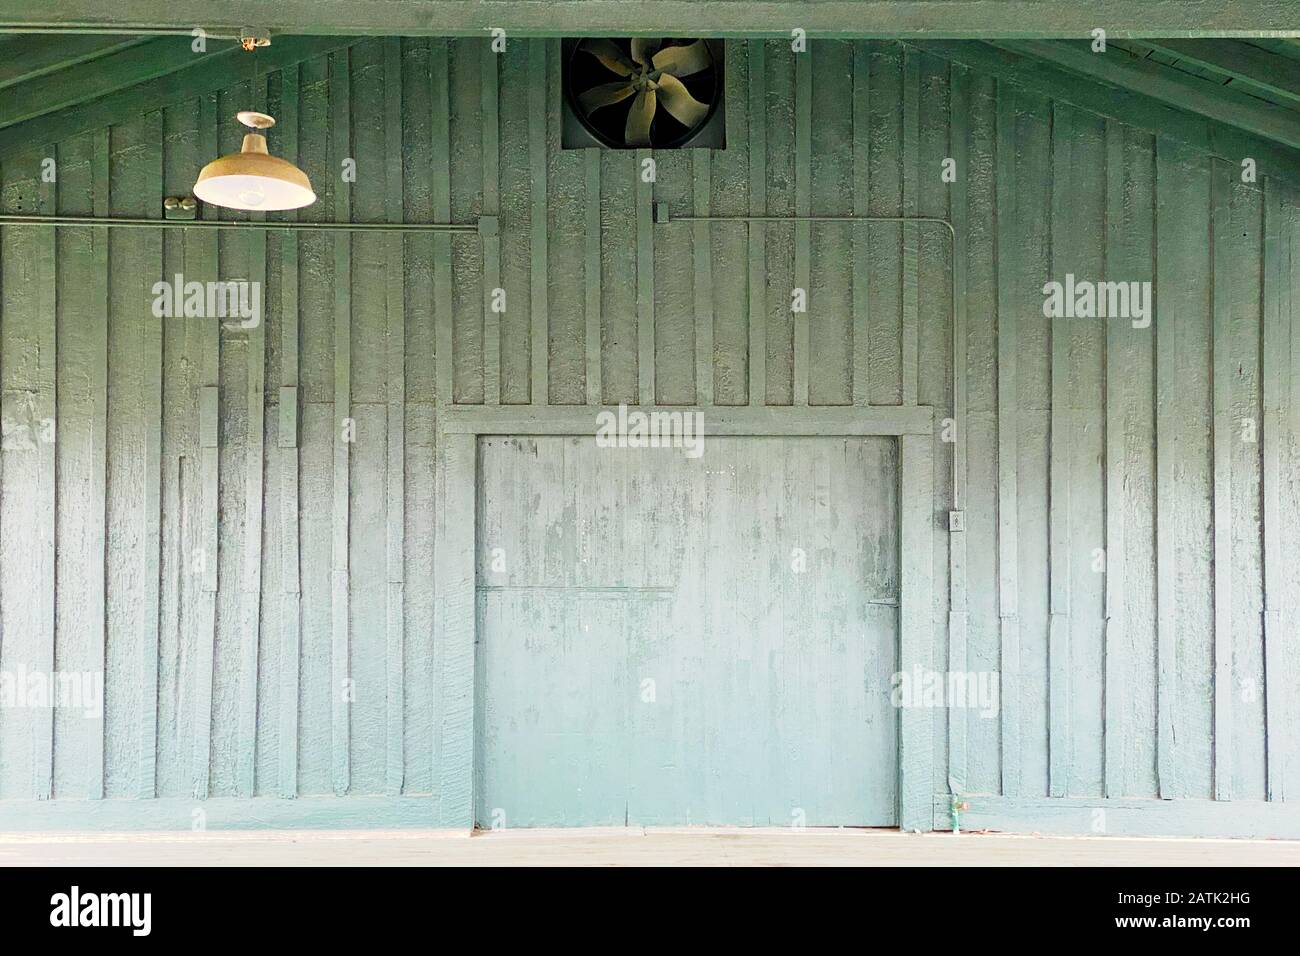 a green country barn loading dock Stock Photo